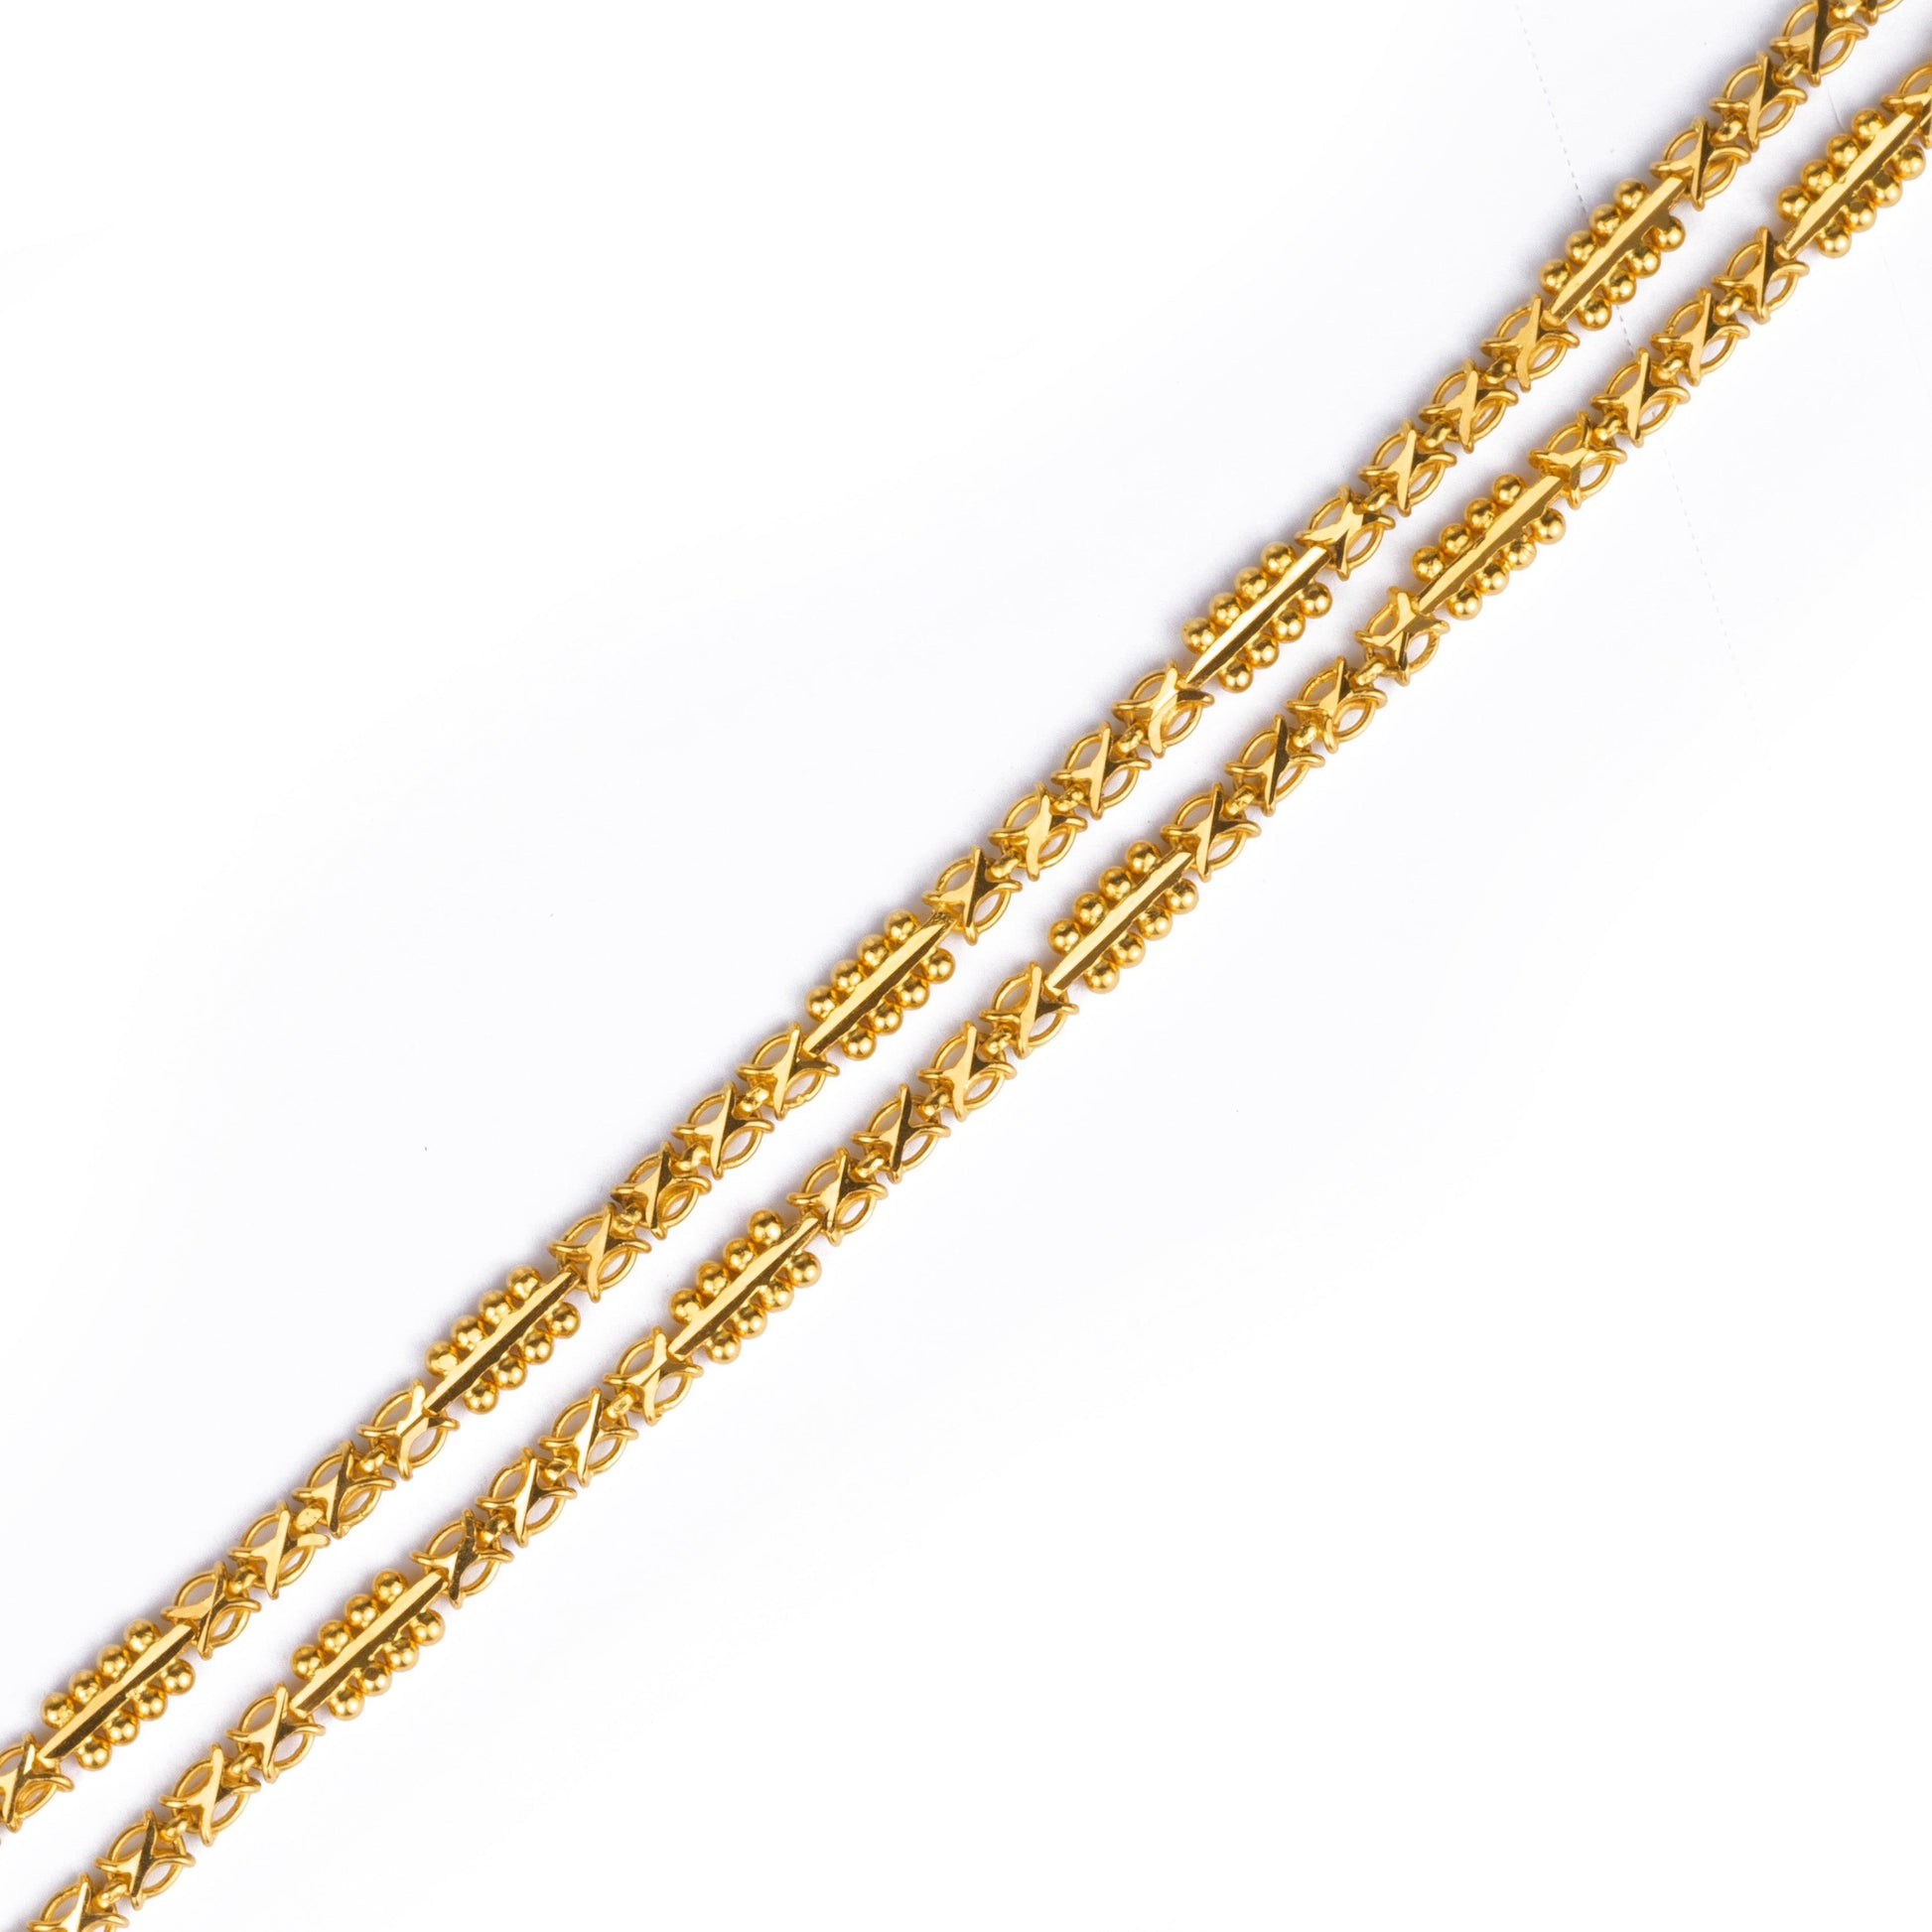 22ct Gold Fancy Chain with a hook clasp C-8451 - Minar Jewellers